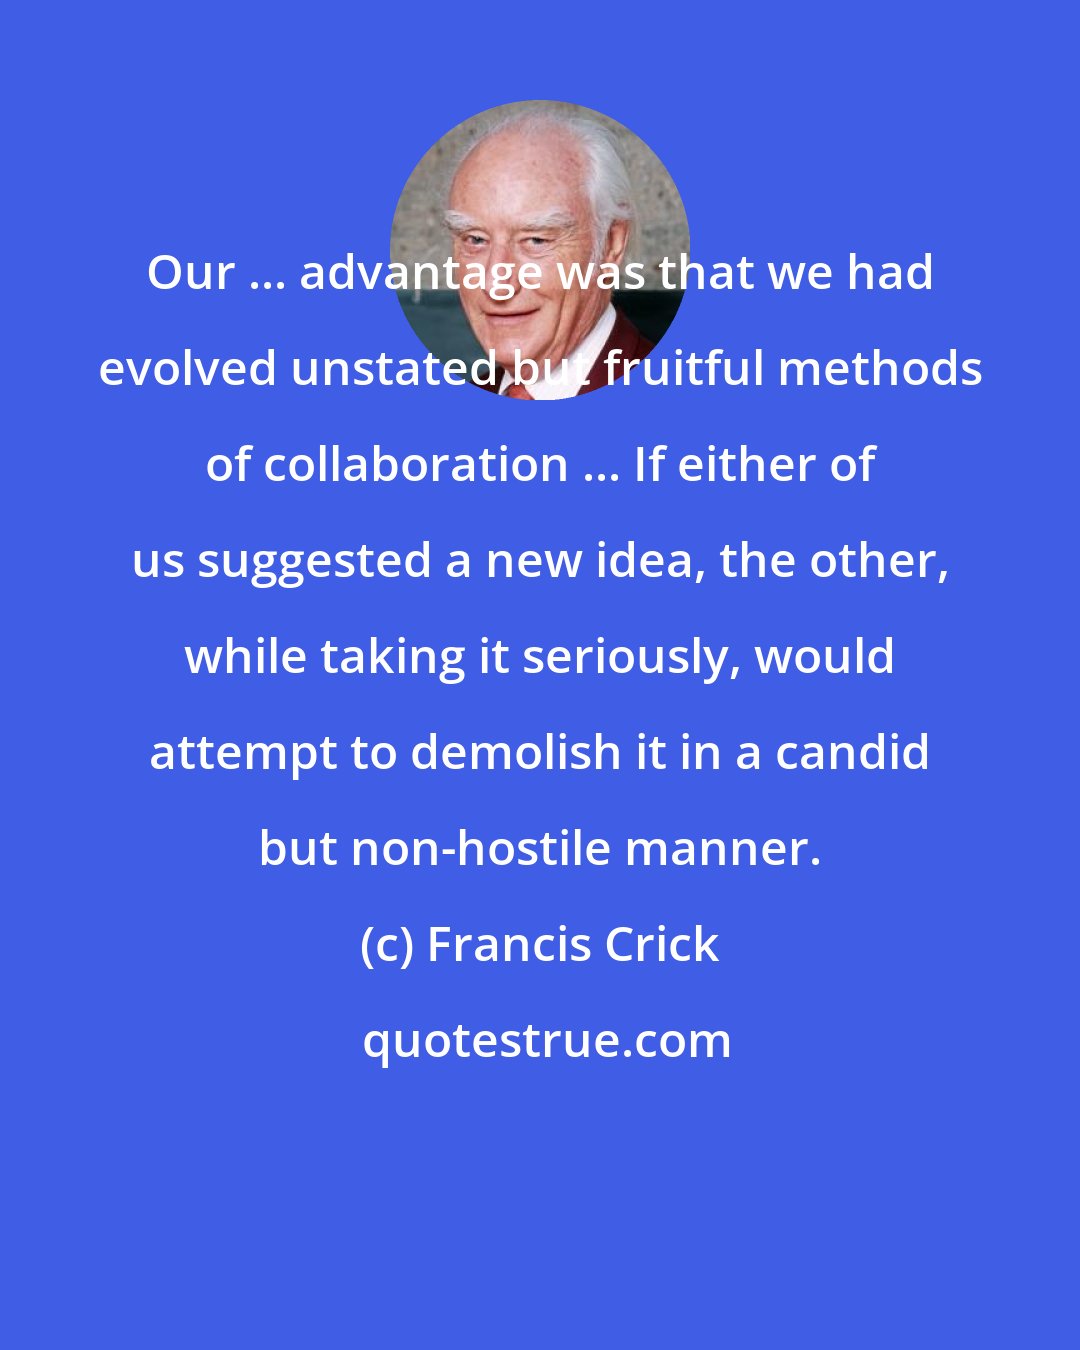 Francis Crick: Our ... advantage was that we had evolved unstated but fruitful methods of collaboration ... If either of us suggested a new idea, the other, while taking it seriously, would attempt to demolish it in a candid but non-hostile manner.